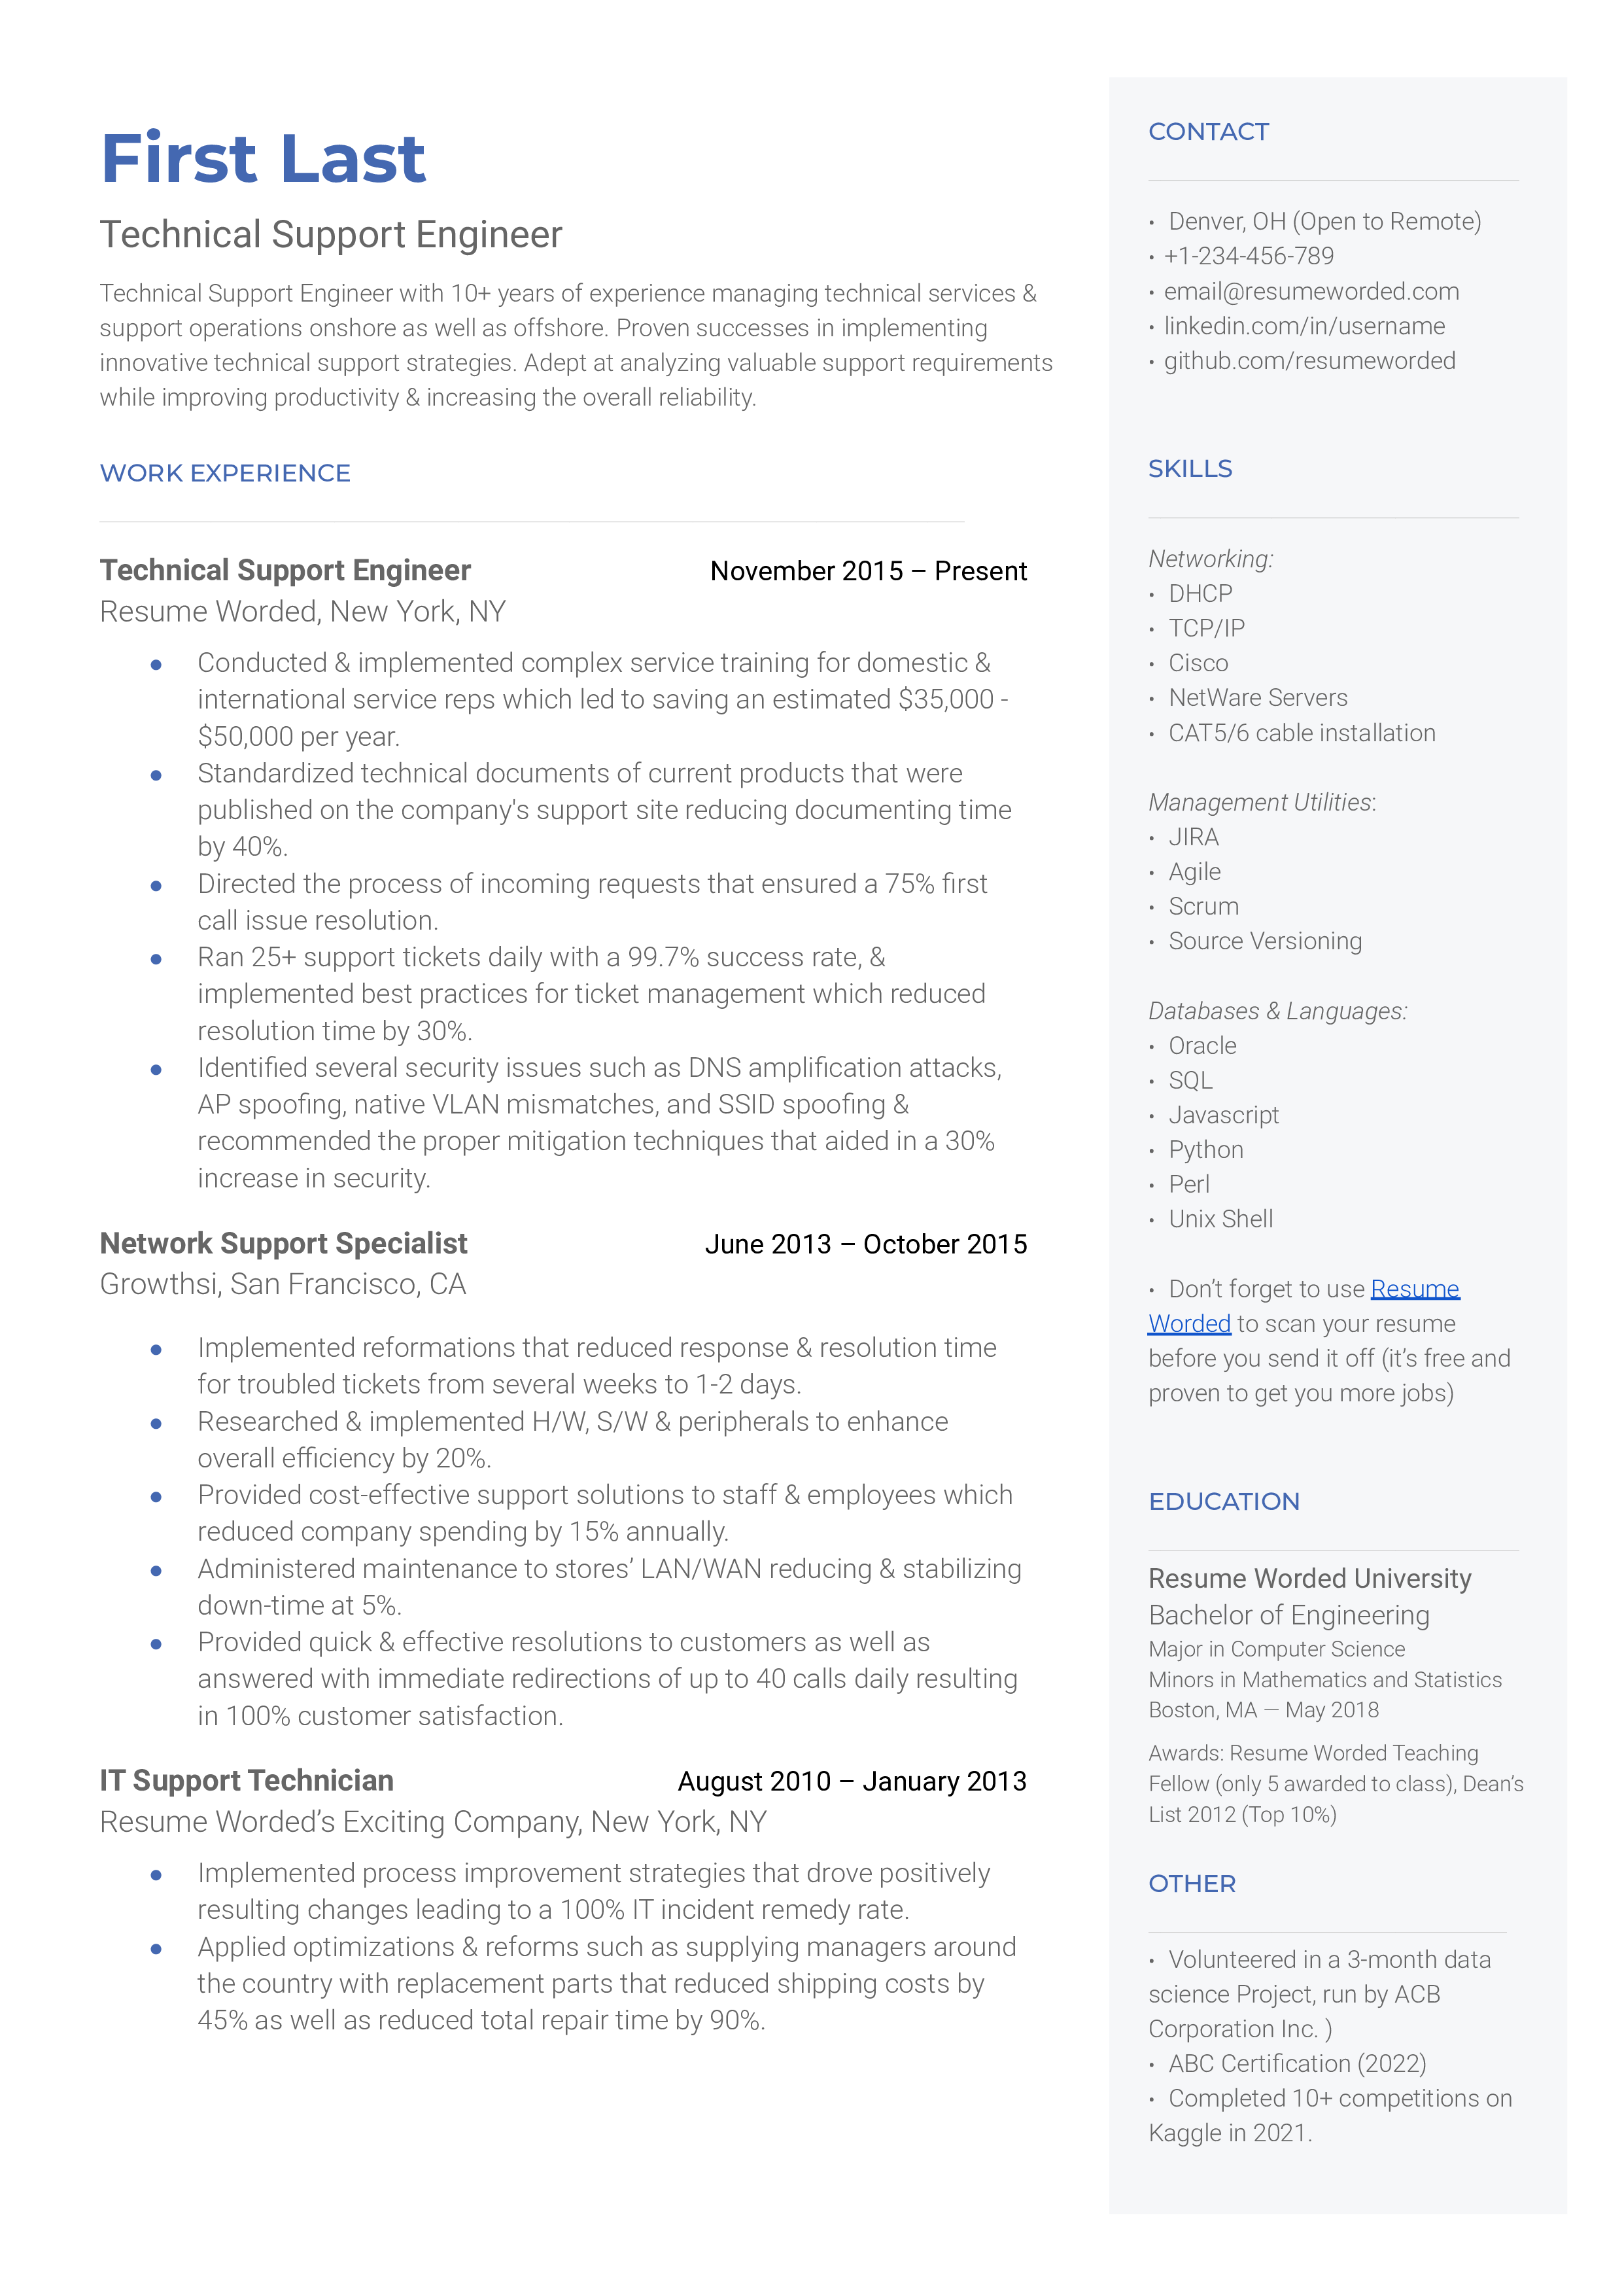 Technical Support Engineer Resume Sample